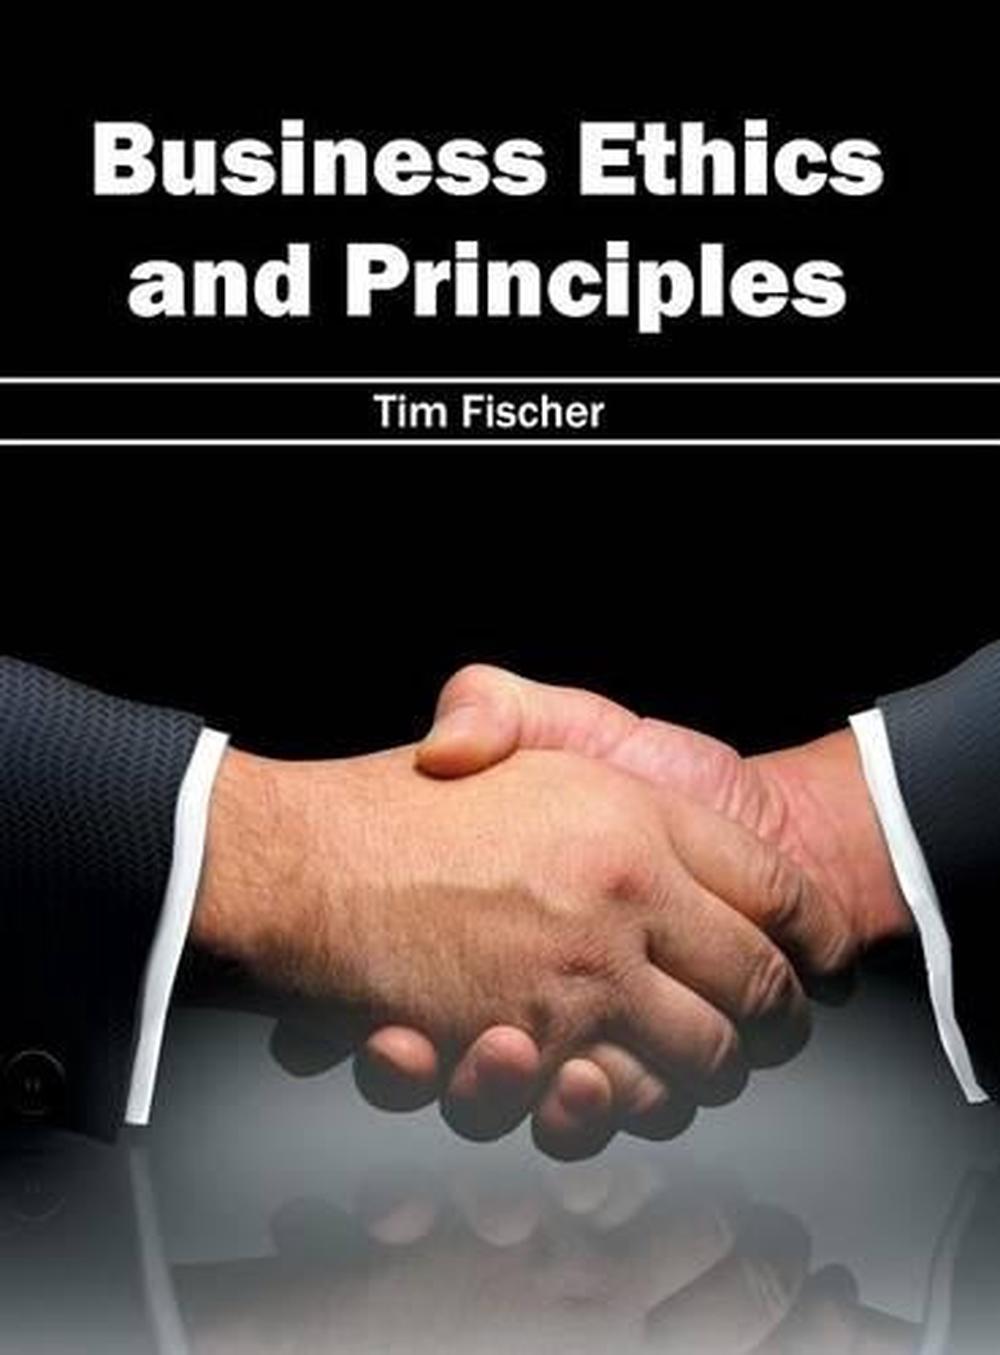 principles of small business management pdf